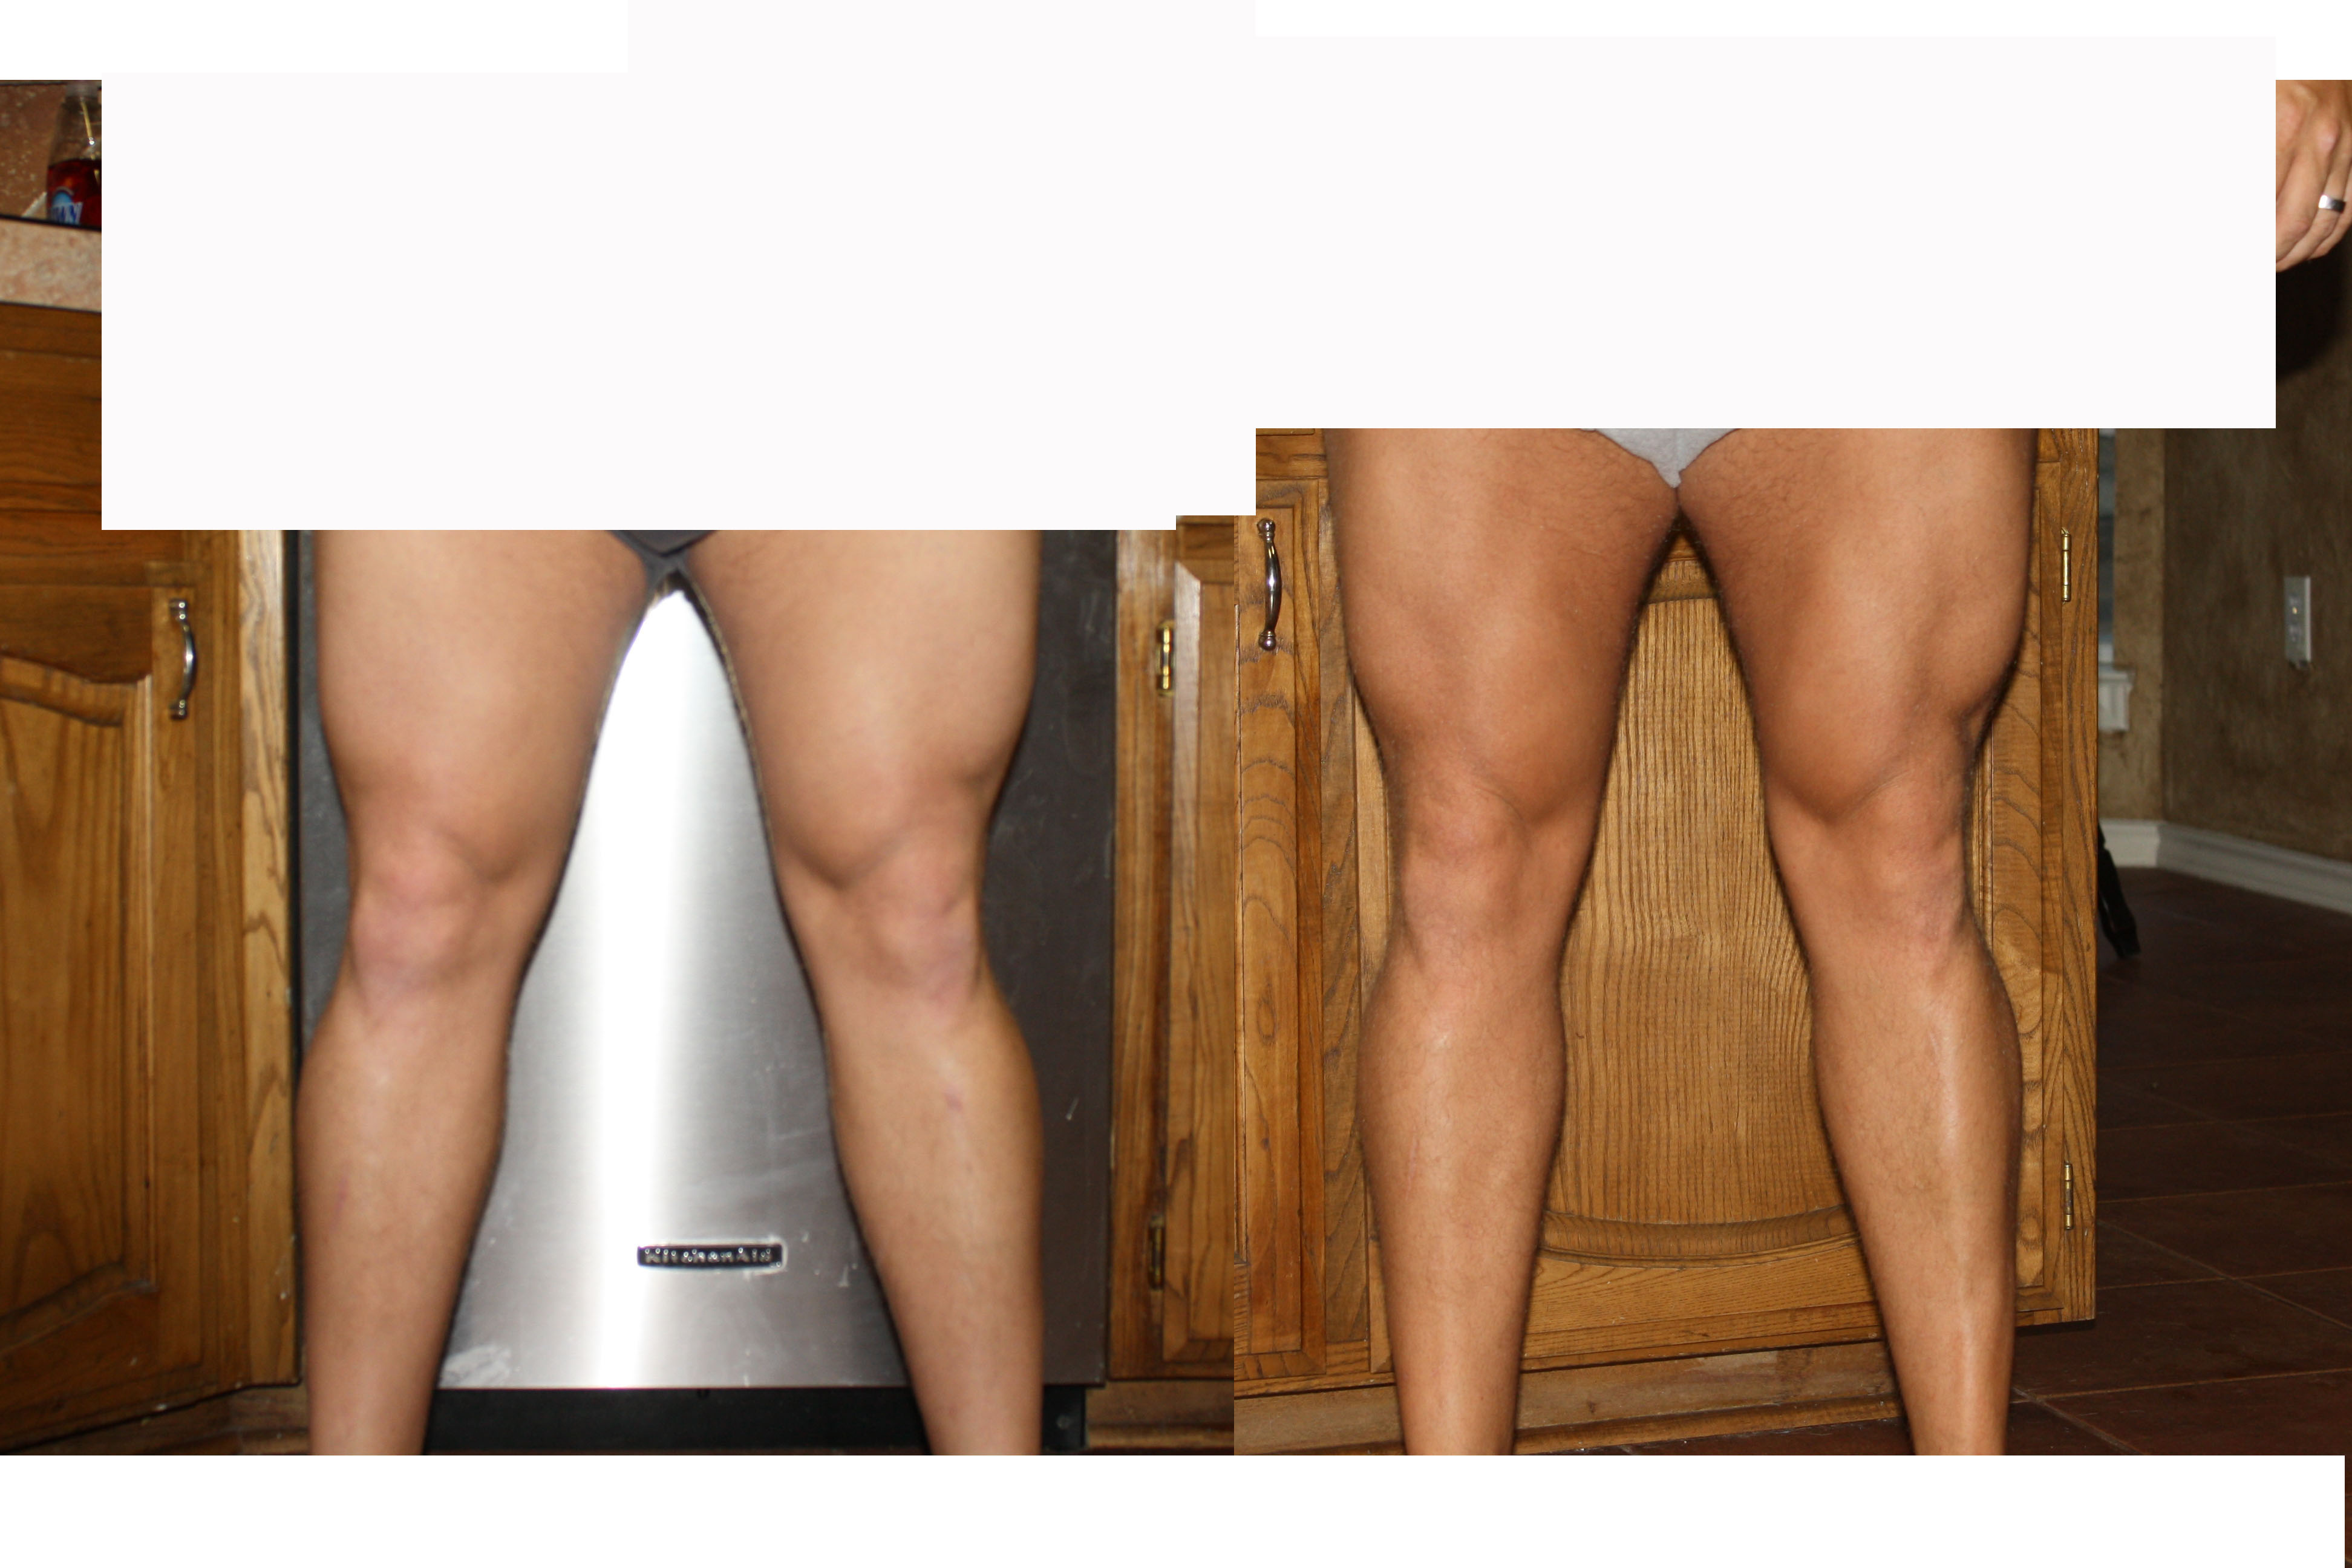 Legs before and after cycle pic.